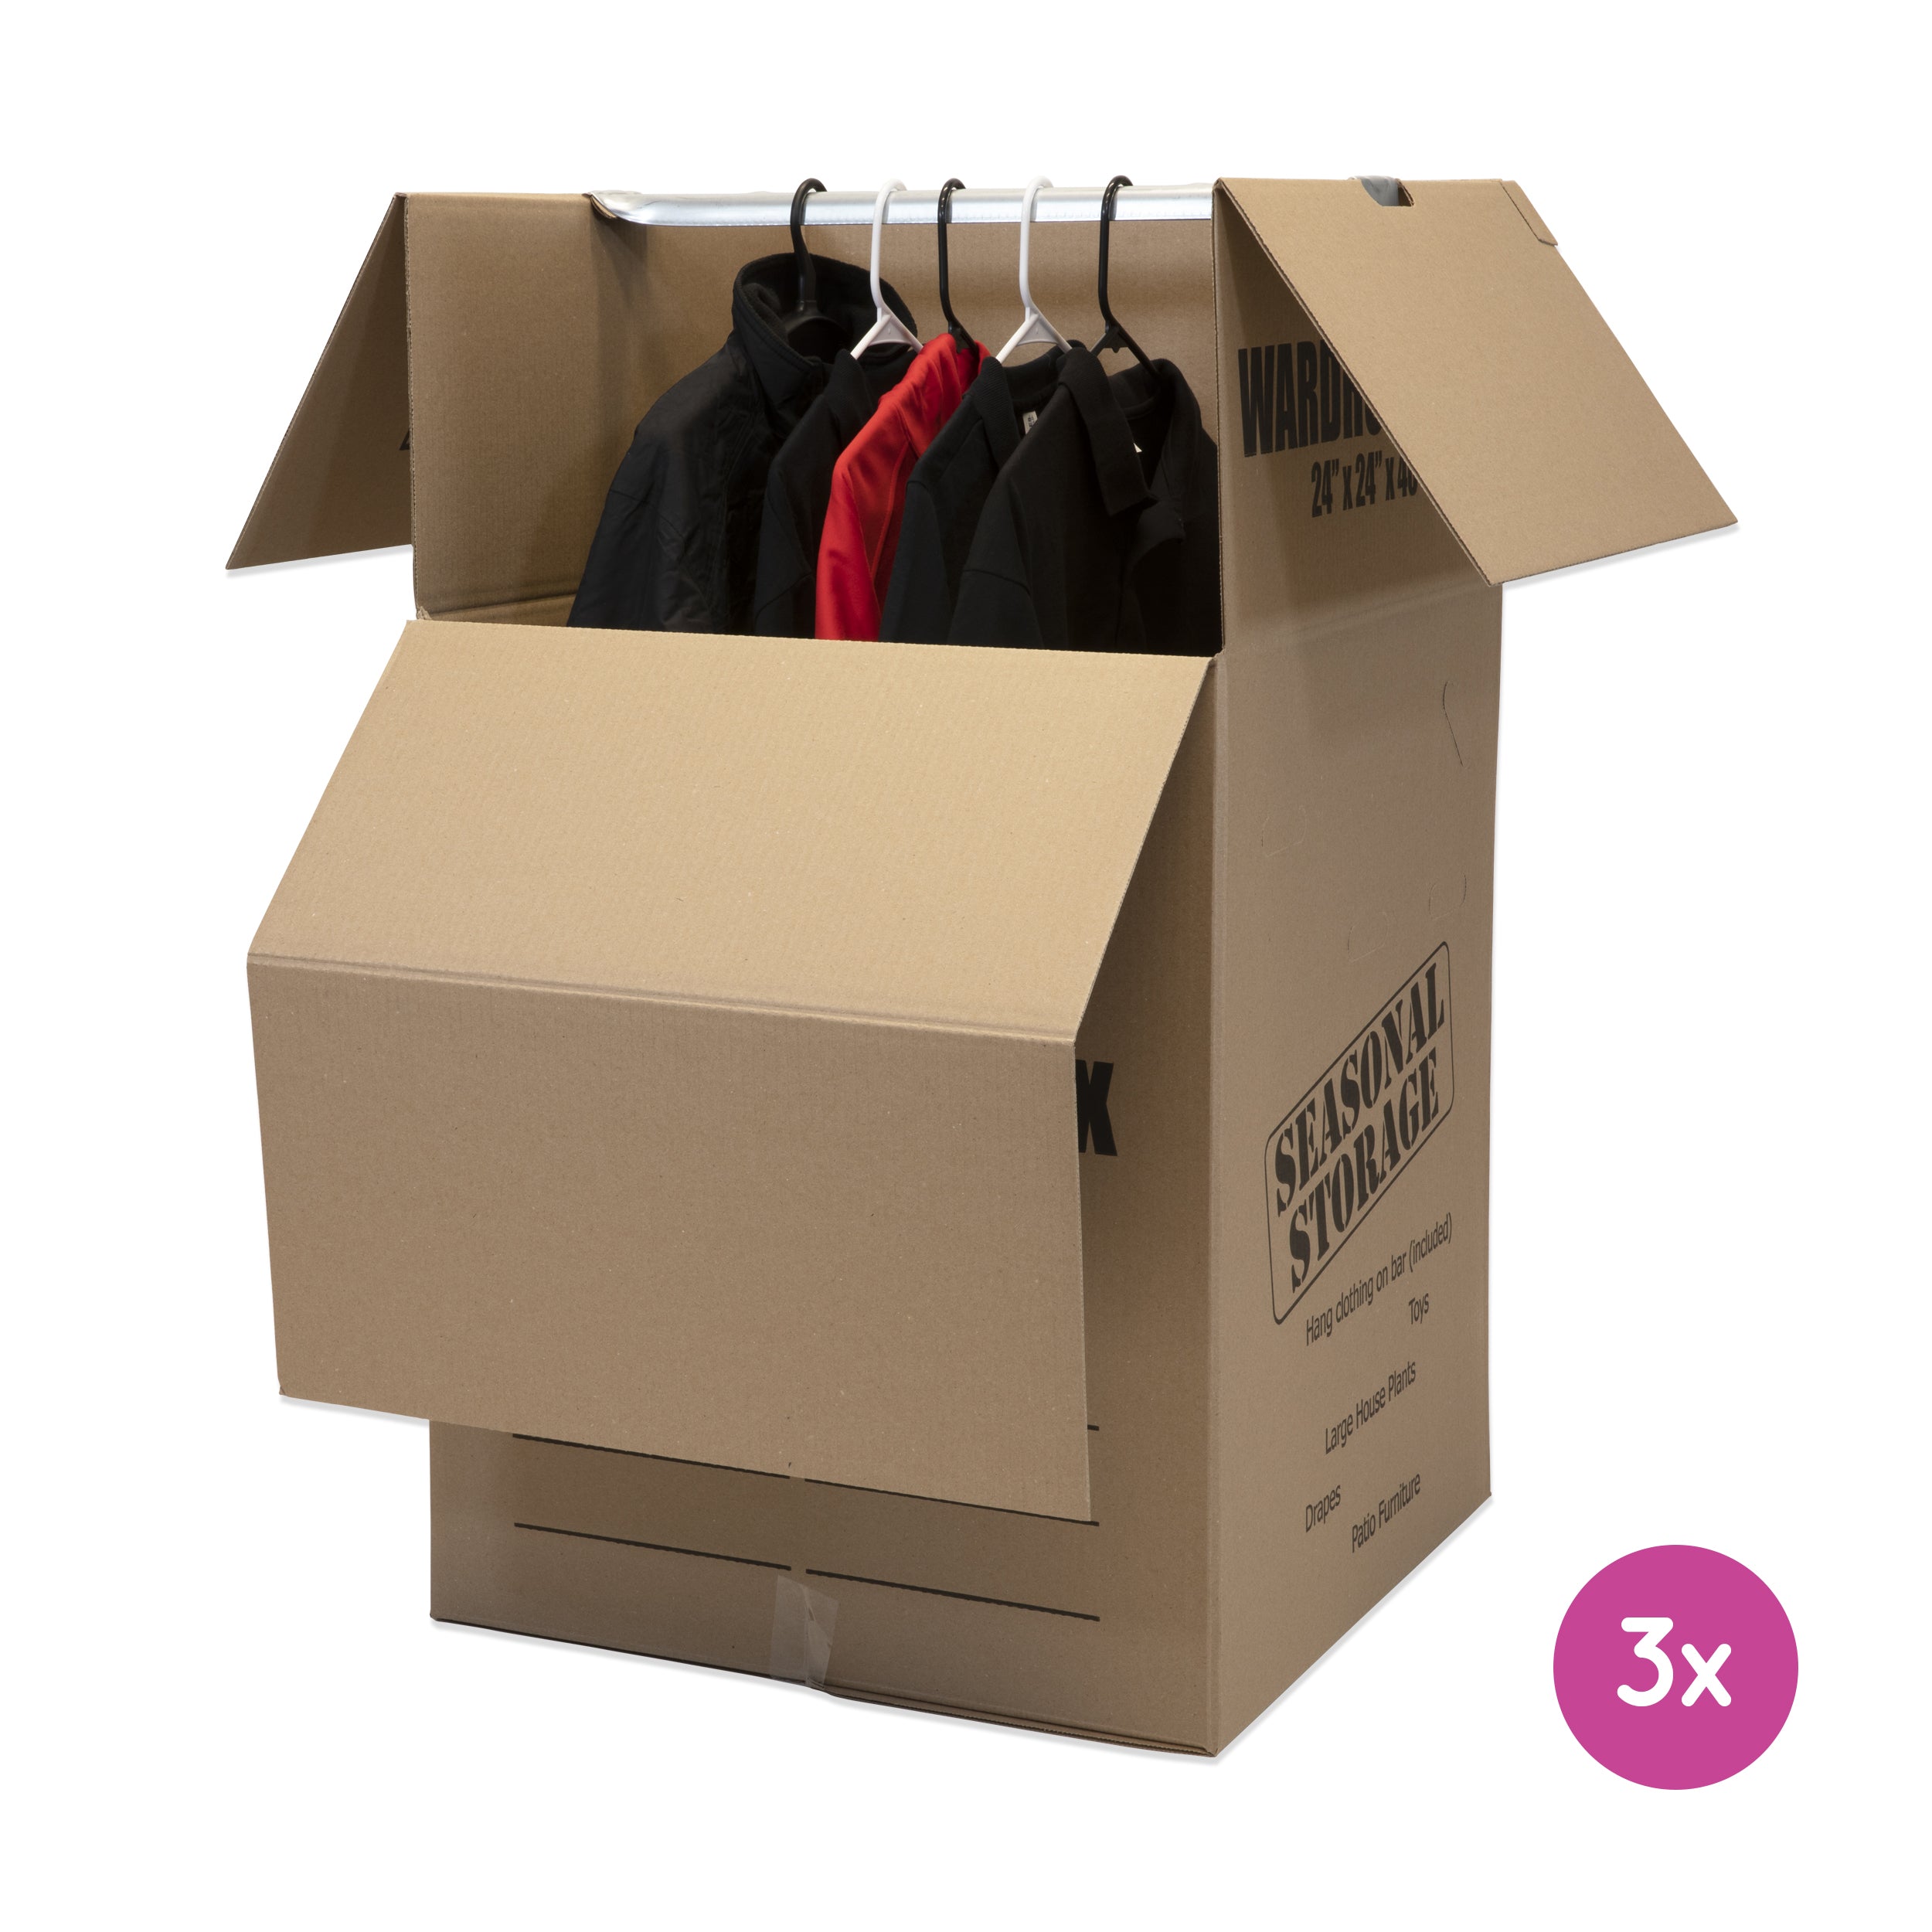 Wardrobe Boxes with Hanger Bars - 3 Boxes/Case